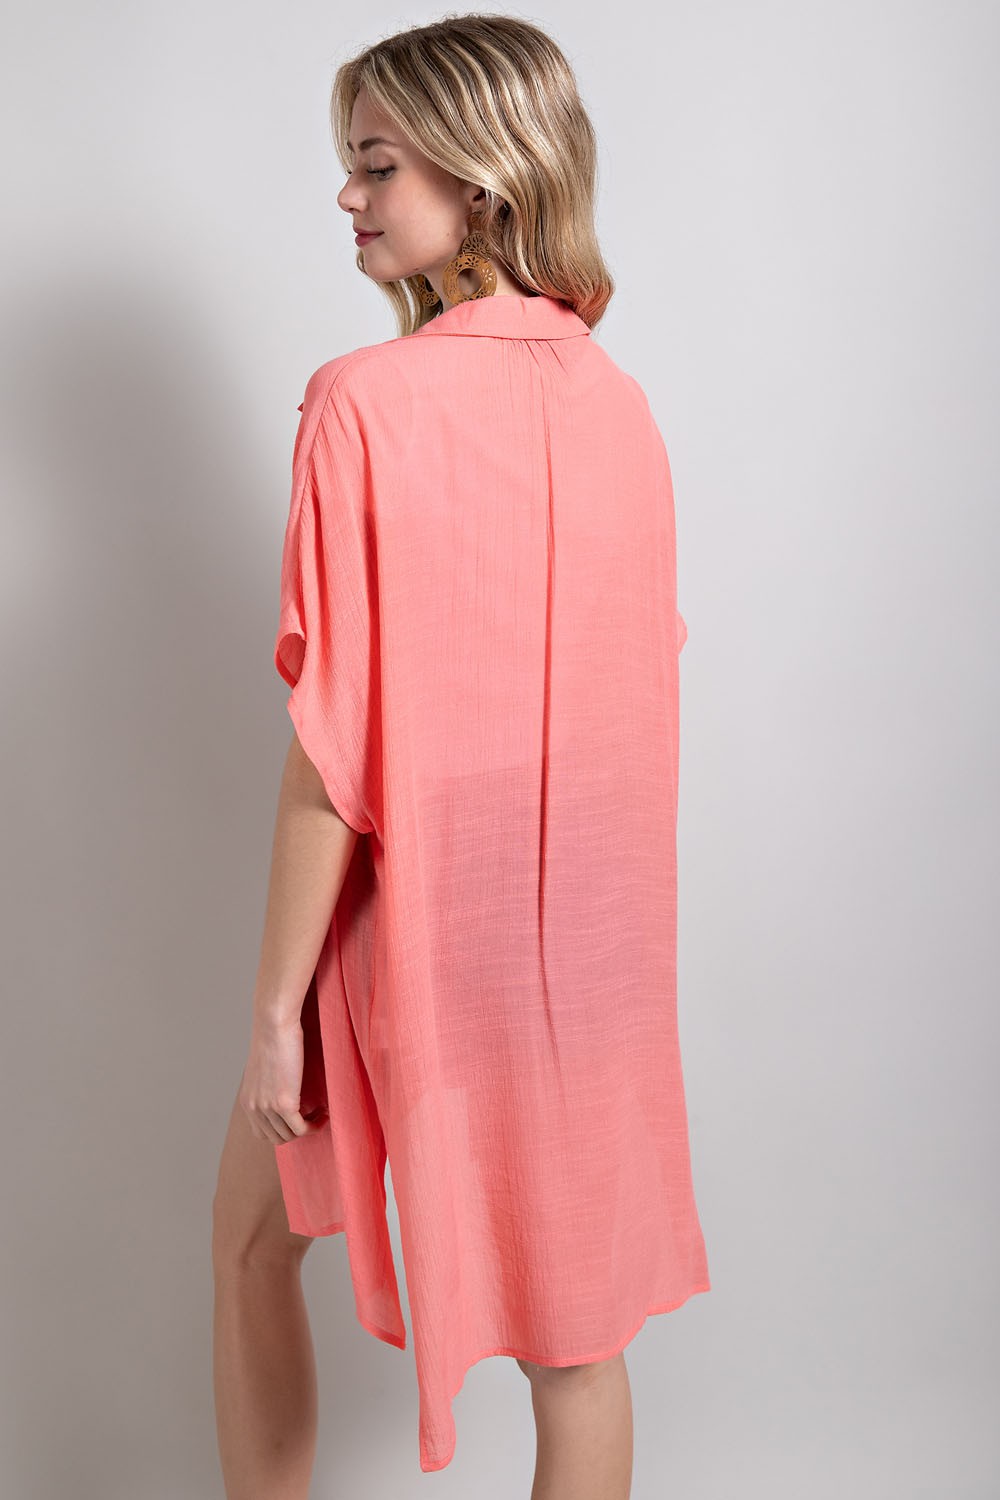 Contessa Button Up Shirt in Coral